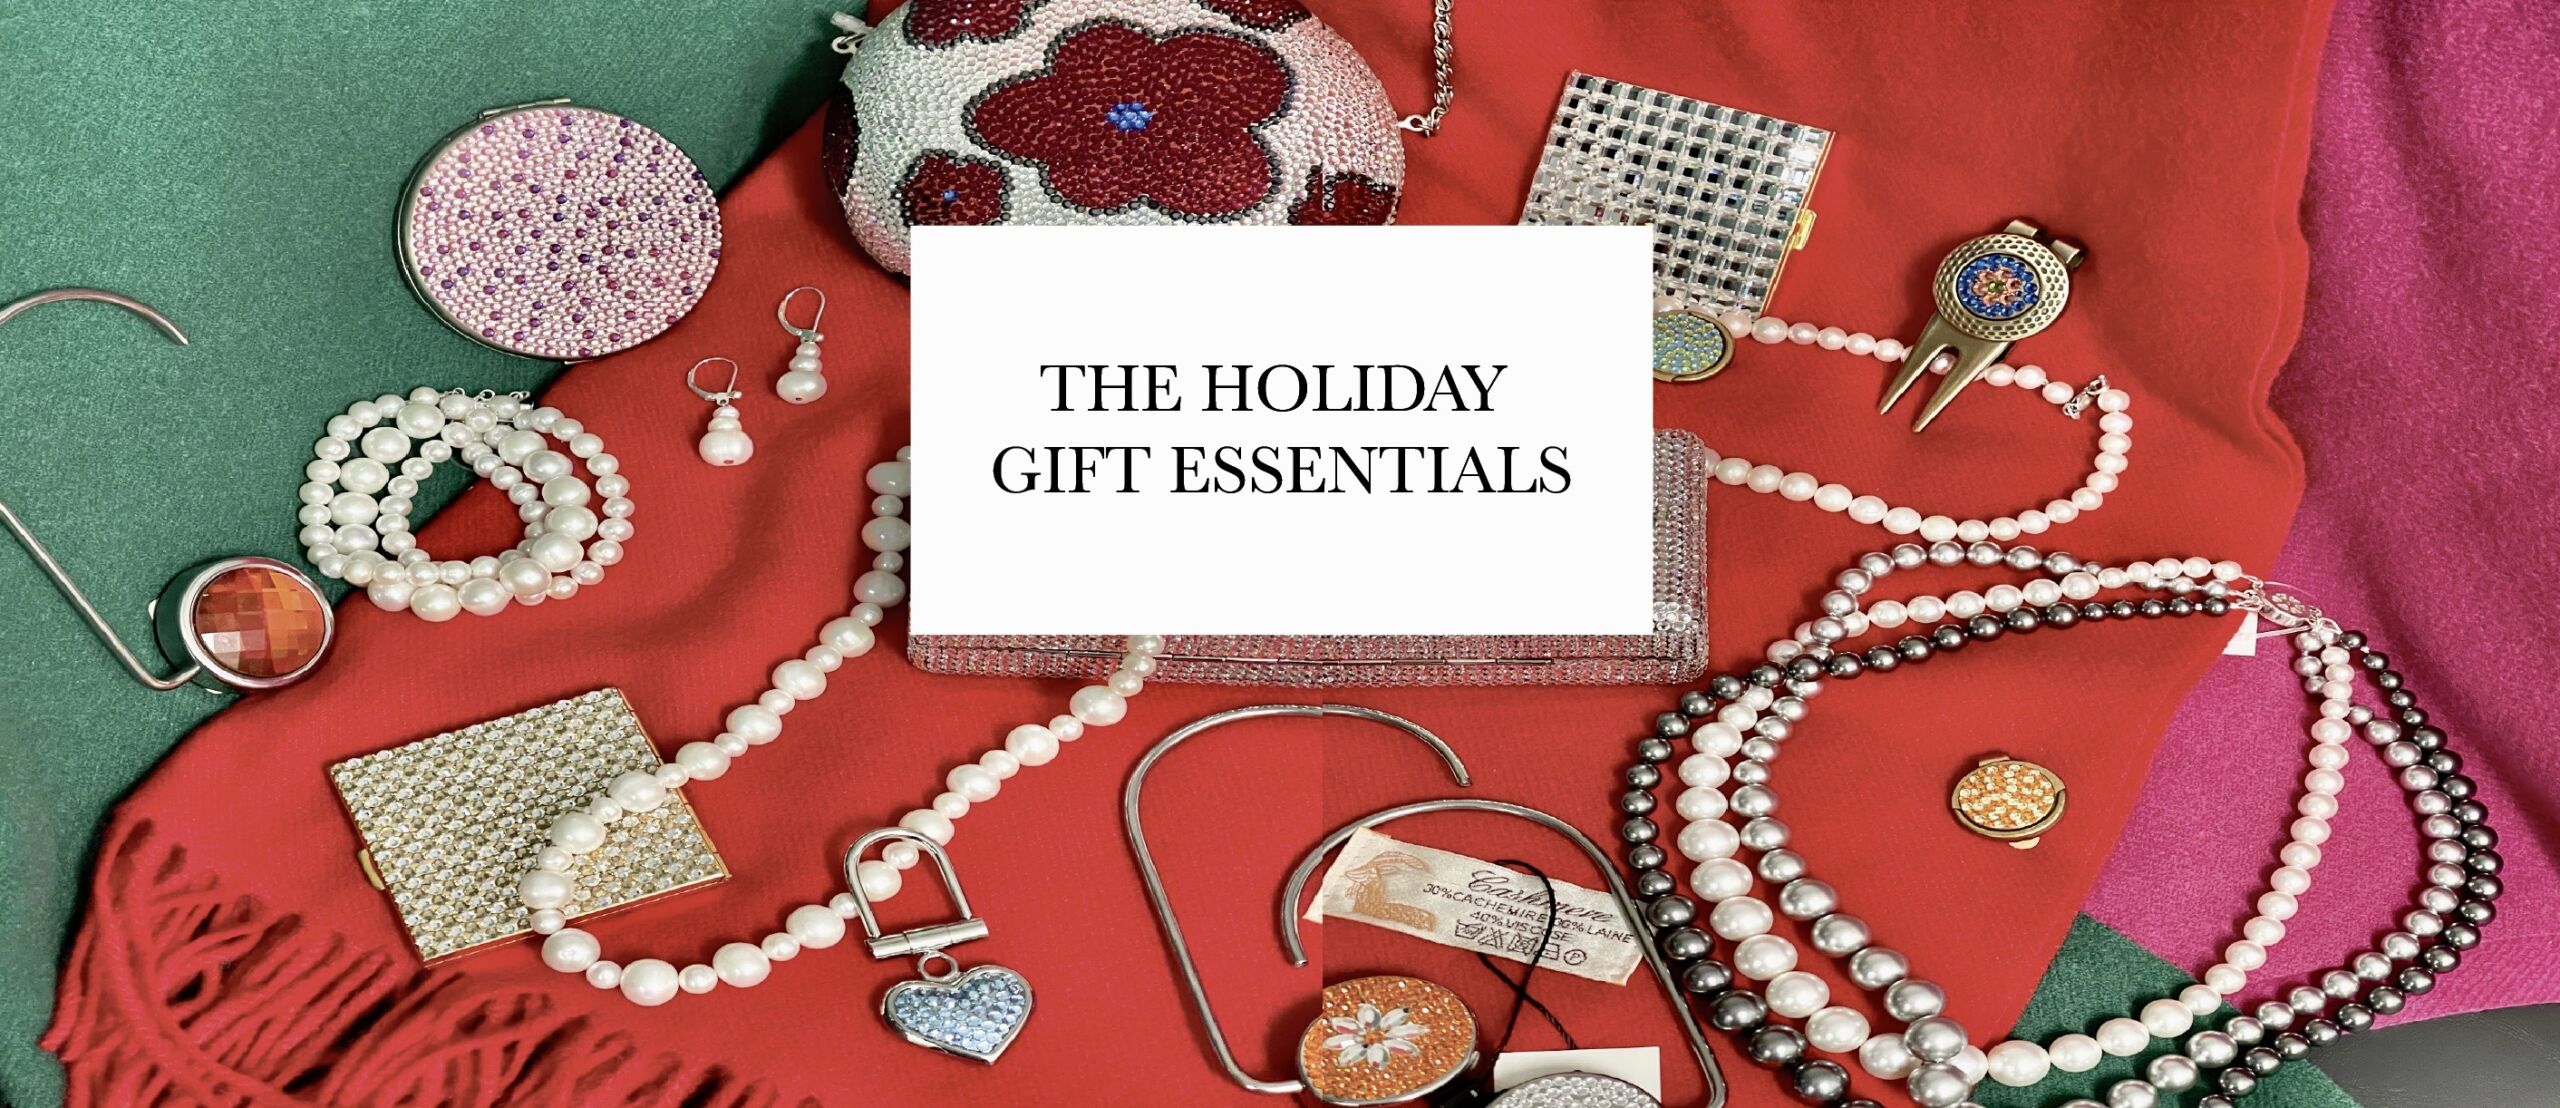 The holiday gift essentials